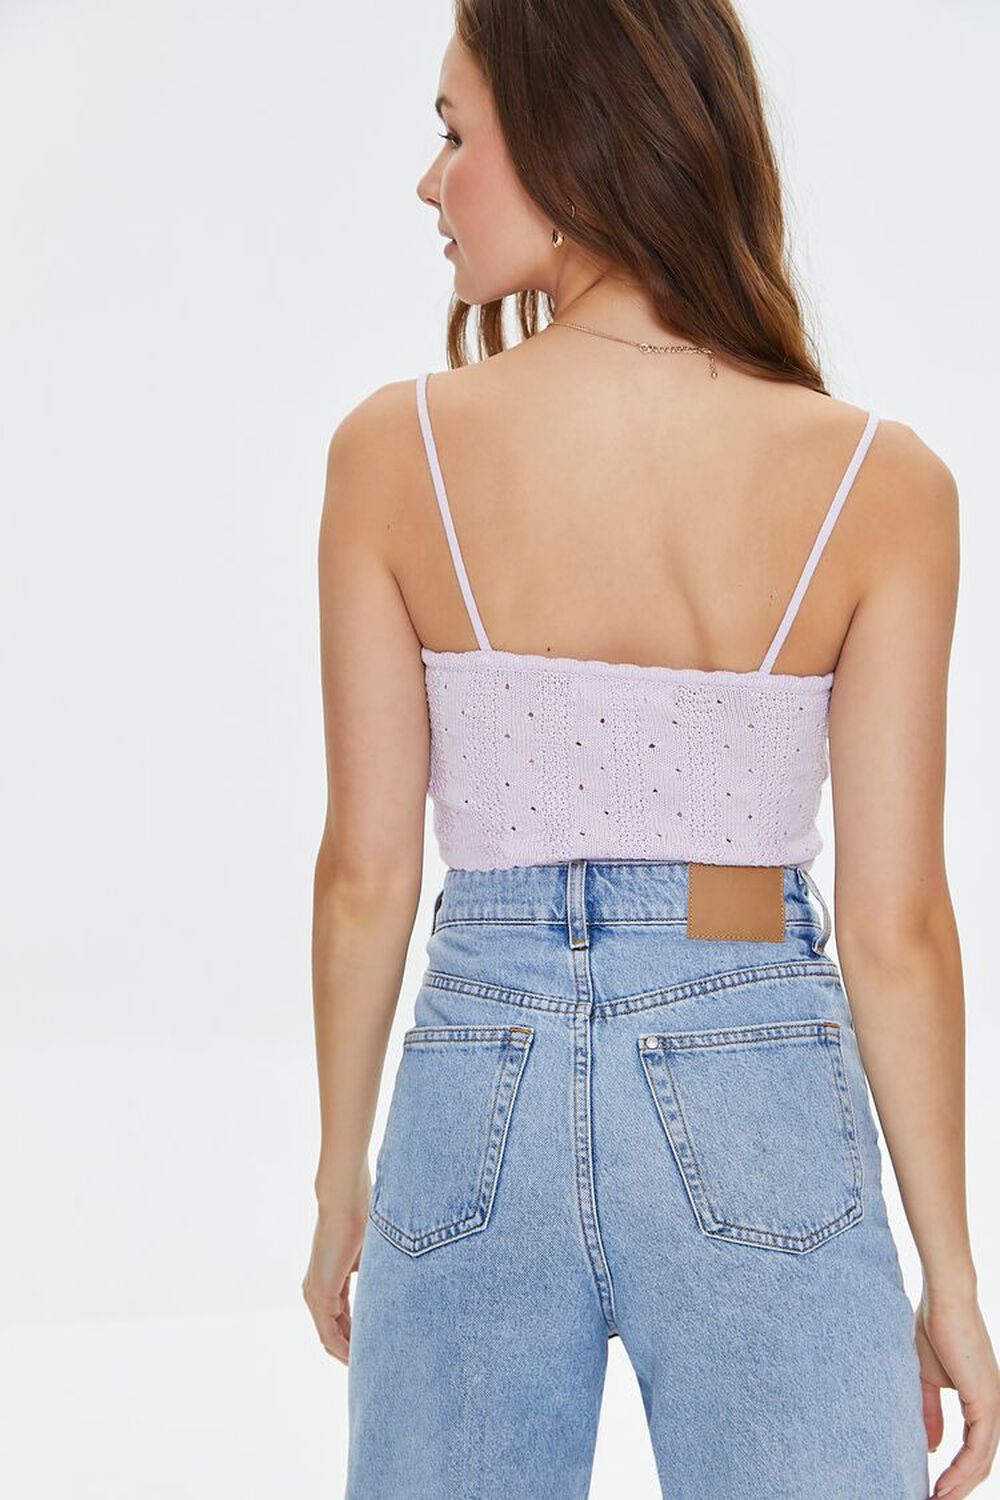 Floral Crochet Cropped Cami, image 3